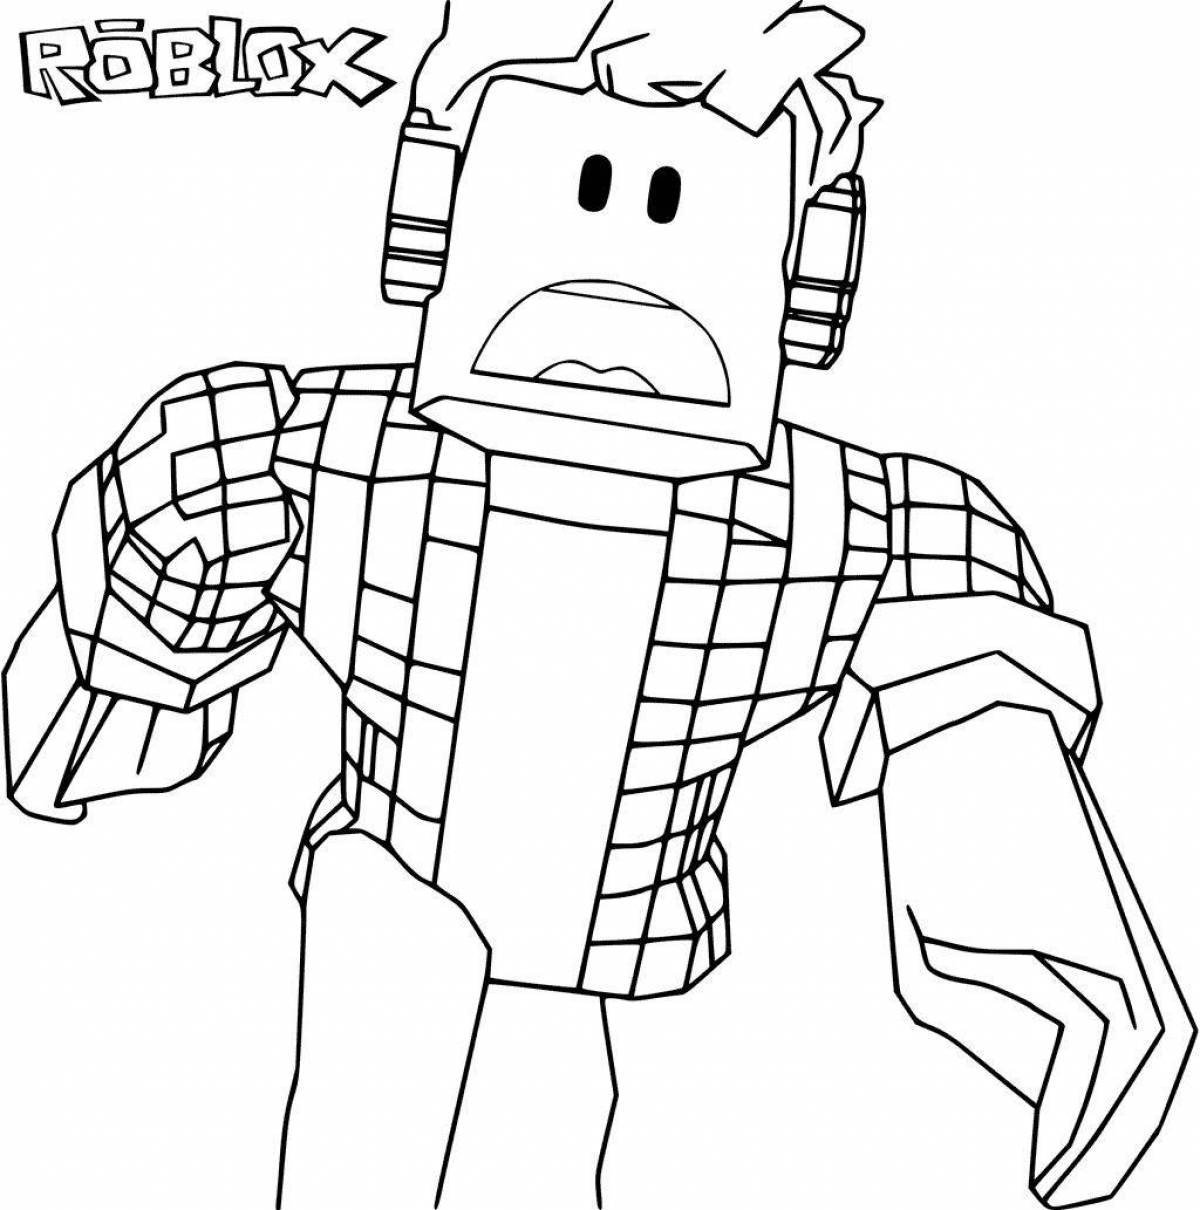 Roblox dors coloring pages obsessed with flowers